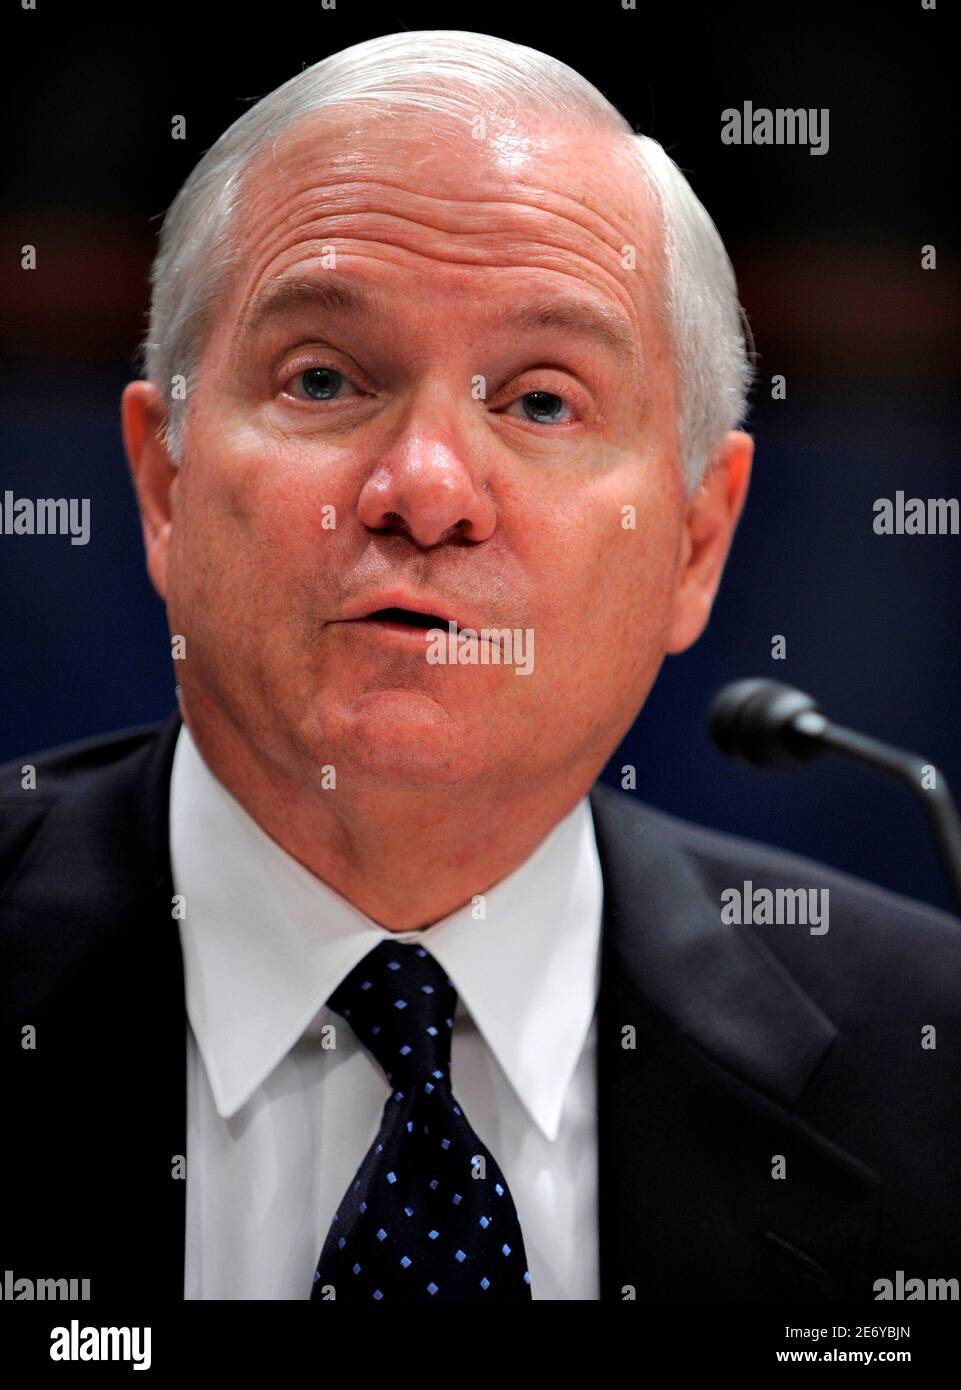 U.S. Secretary of Defense Robert Gates testifies before the House Defense Appropriations Subcommittee on the fiscal year 2010 defense budget, on Capitol Hill in Washington, May 20, 2009.   REUTERS/Mike Theiler   (UNITED STATES MILITARY) Stock Photo